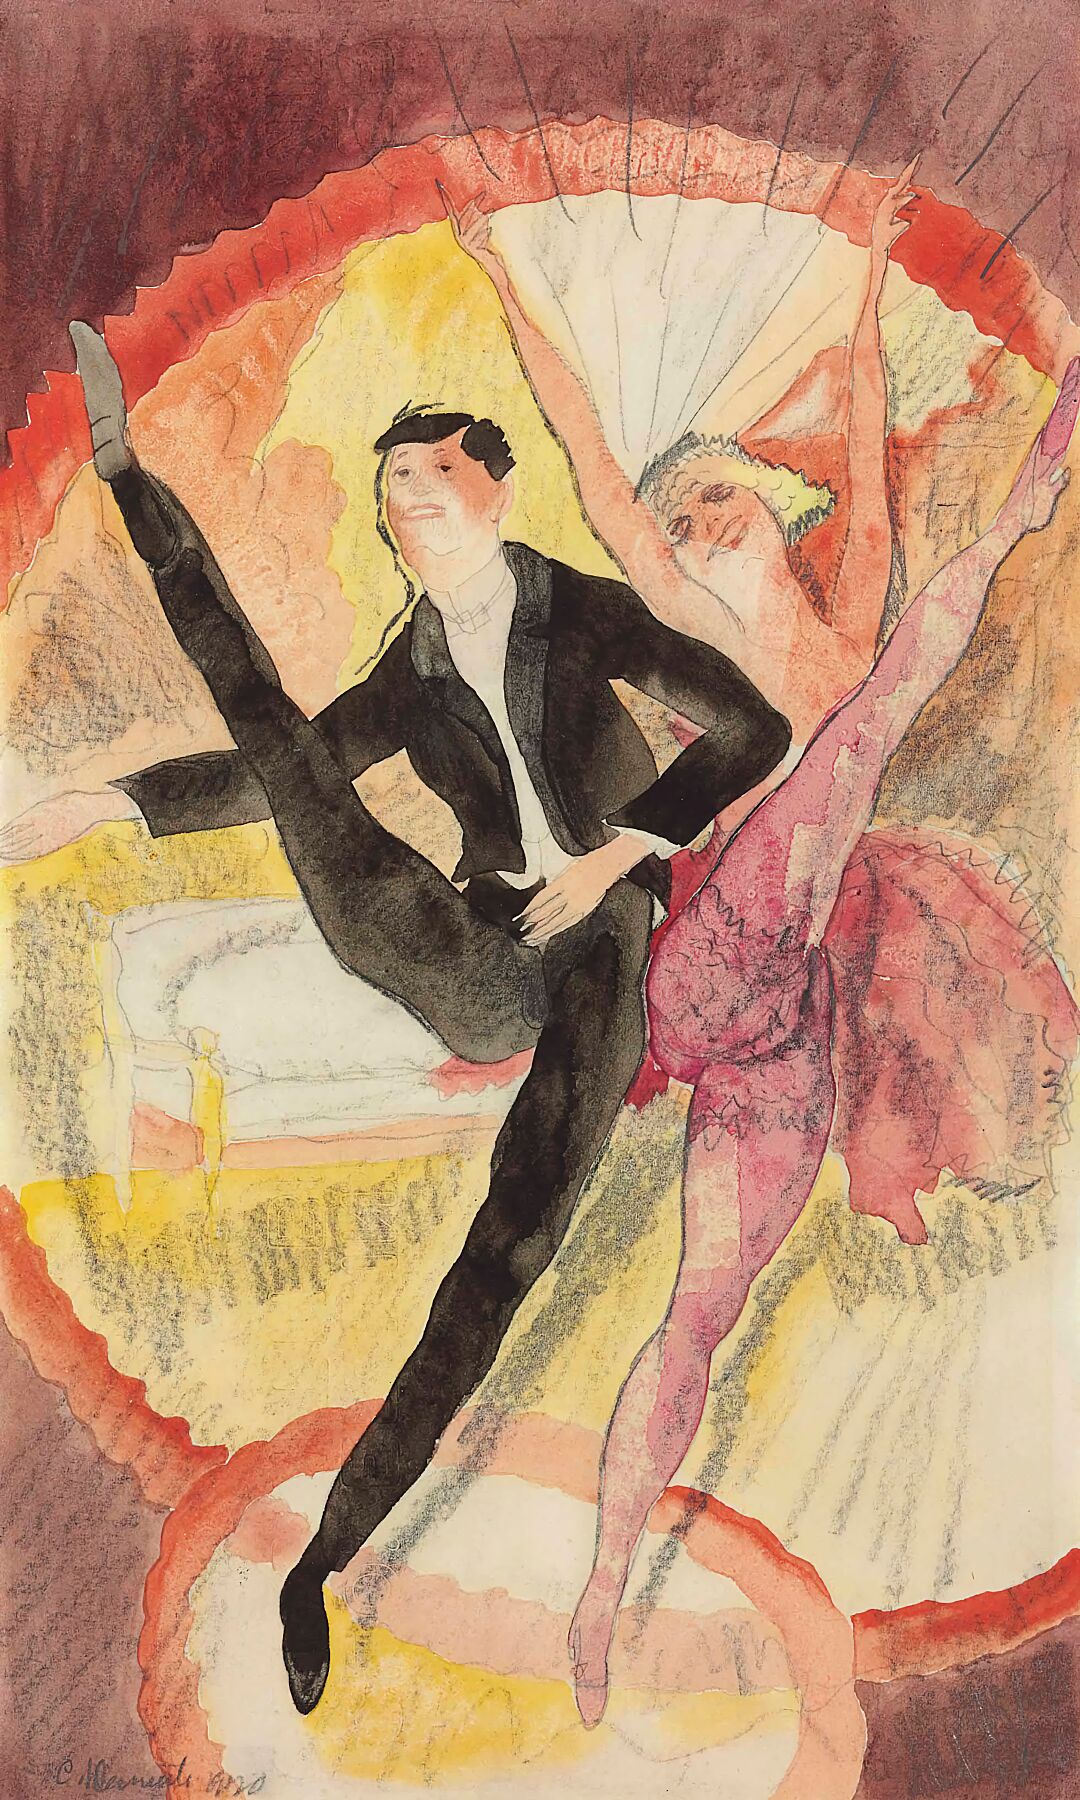 Charles Demuth (1883-1935) In Vaudeville- Two Dancers 1920